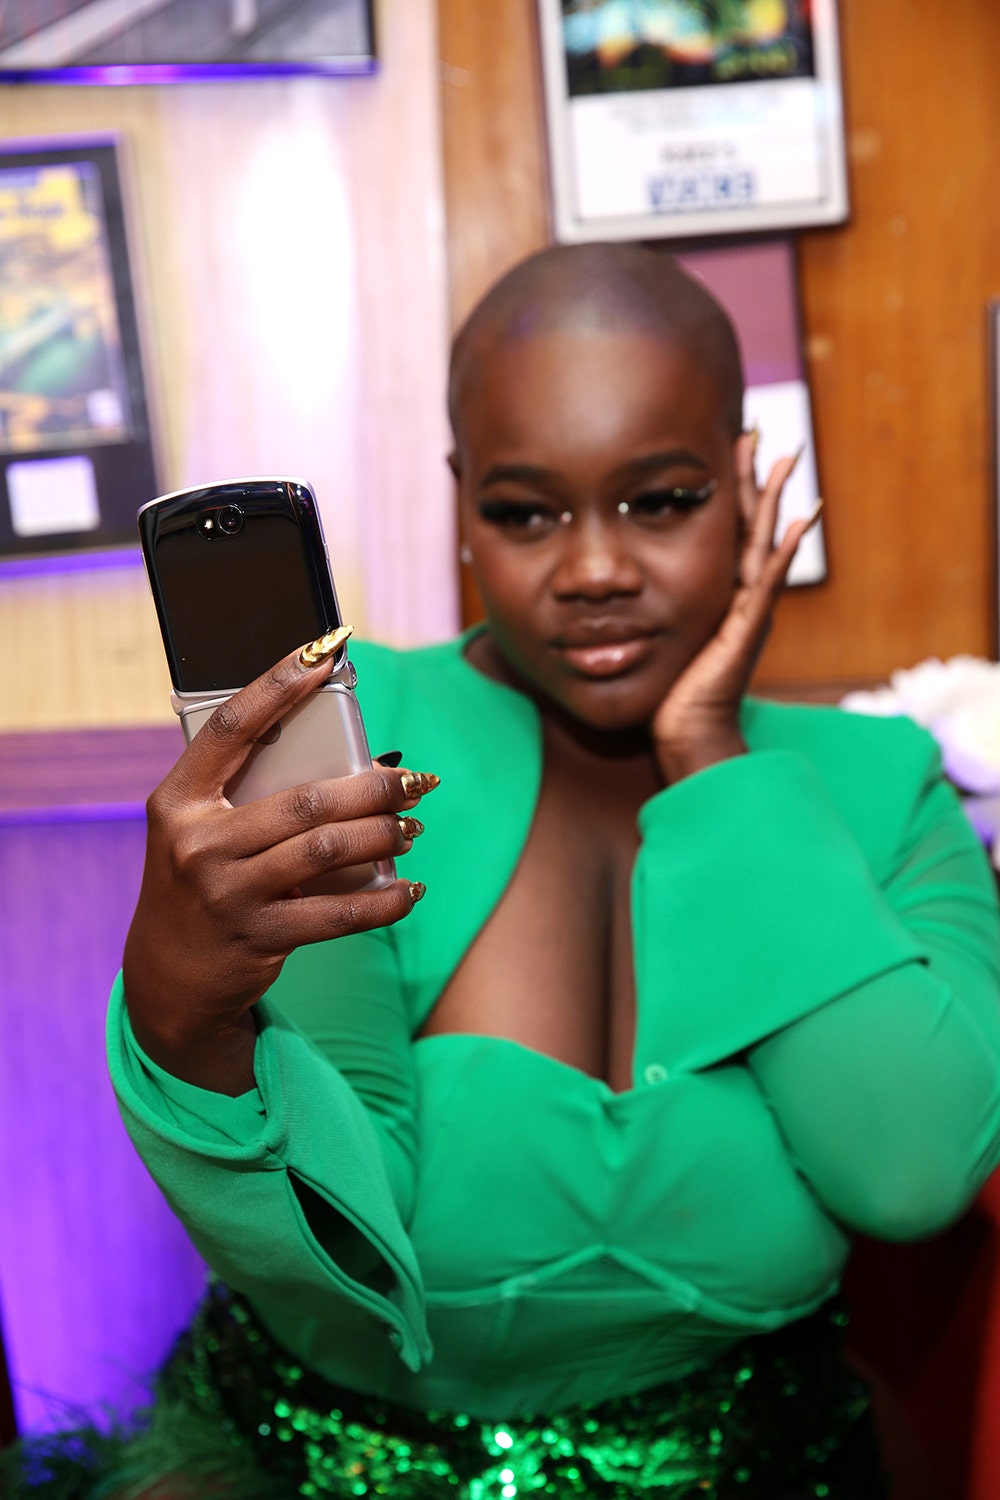 Achieng Agutu wering a bright green top and holding a cell phone